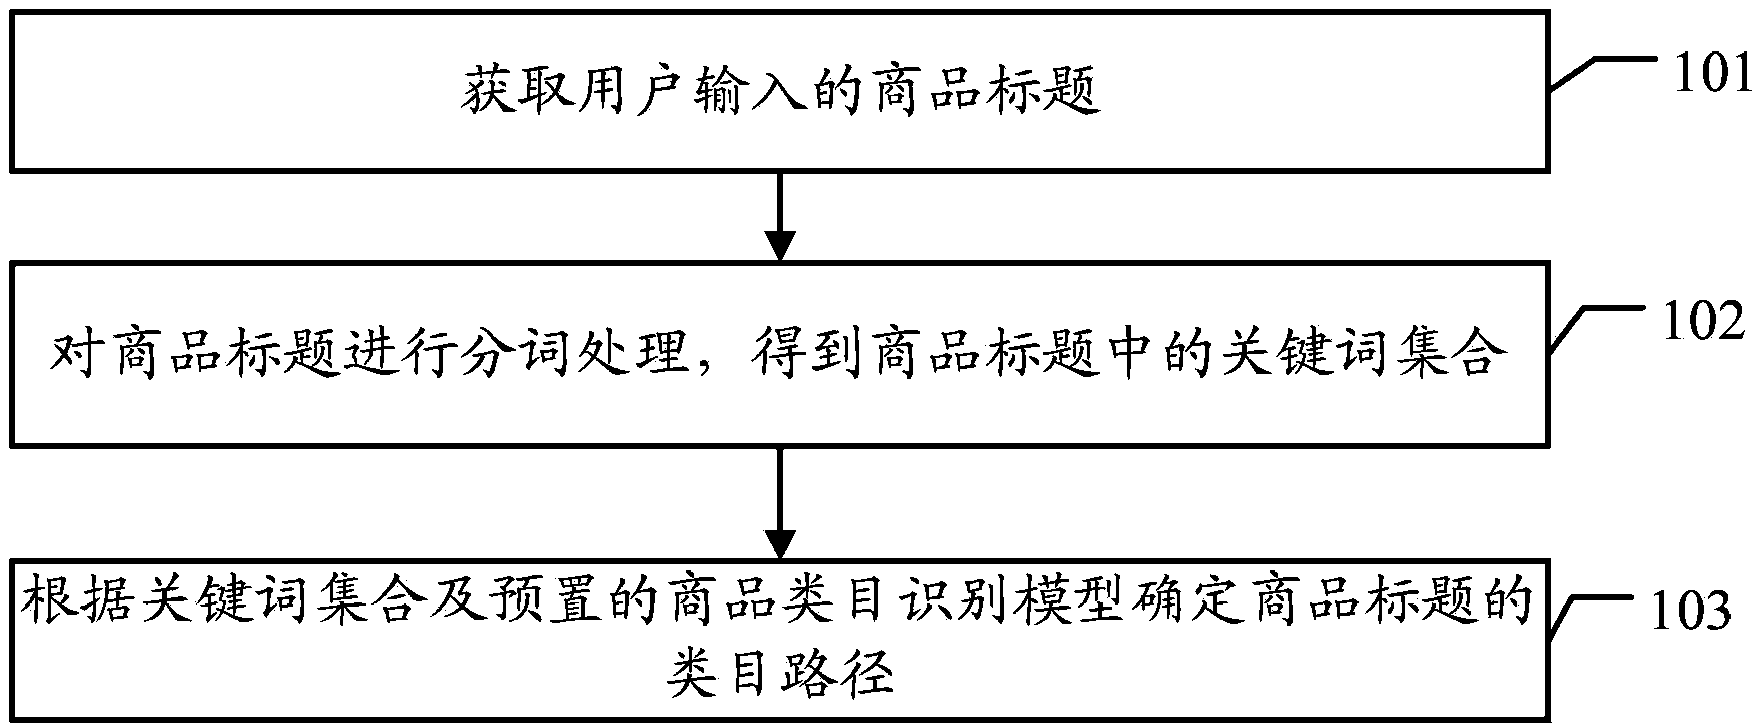 Category path recognition method and system